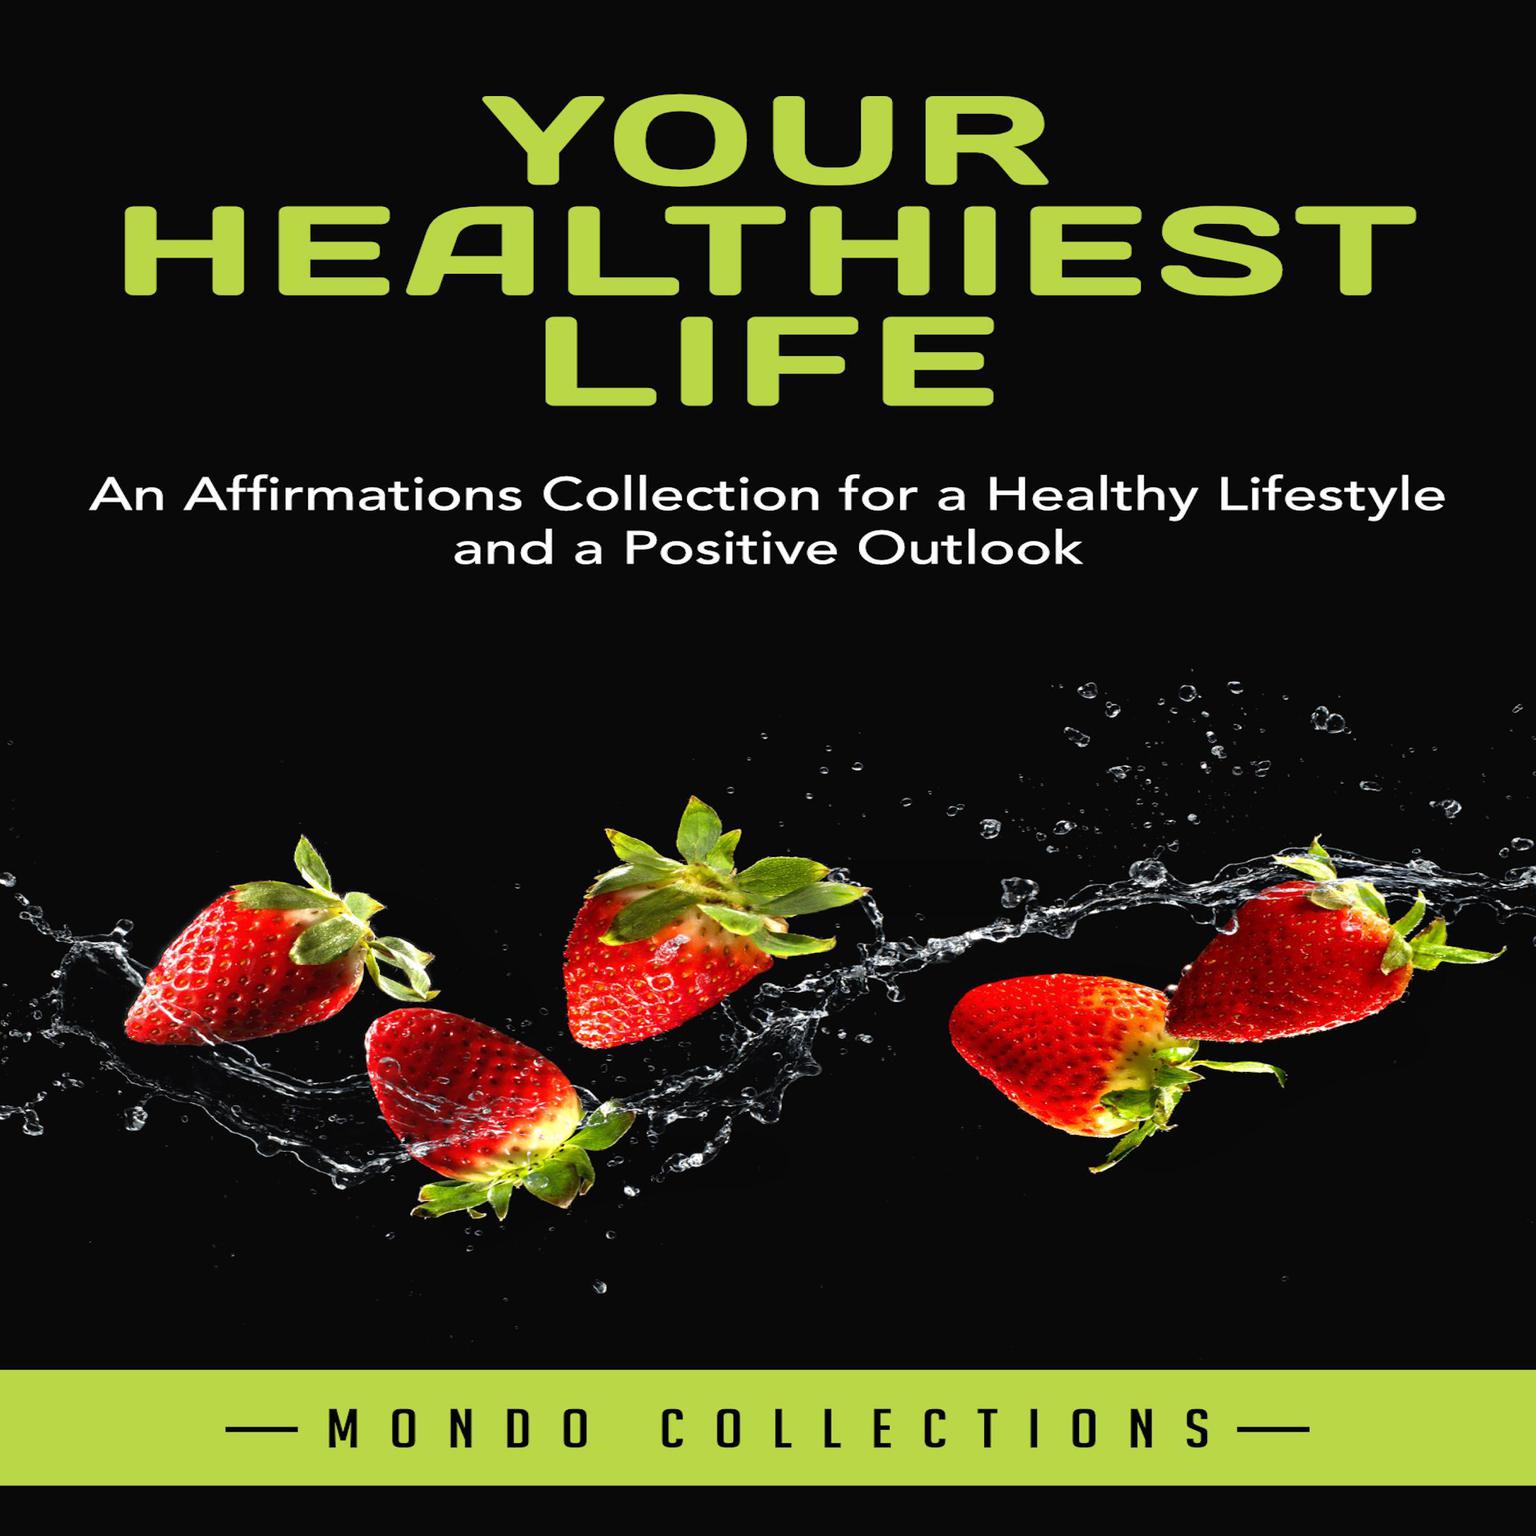 Your Healthiest Life: An Affirmations Collection for a Healthy Lifestyle and a Positive Outlook Audiobook, by Mondo Collections